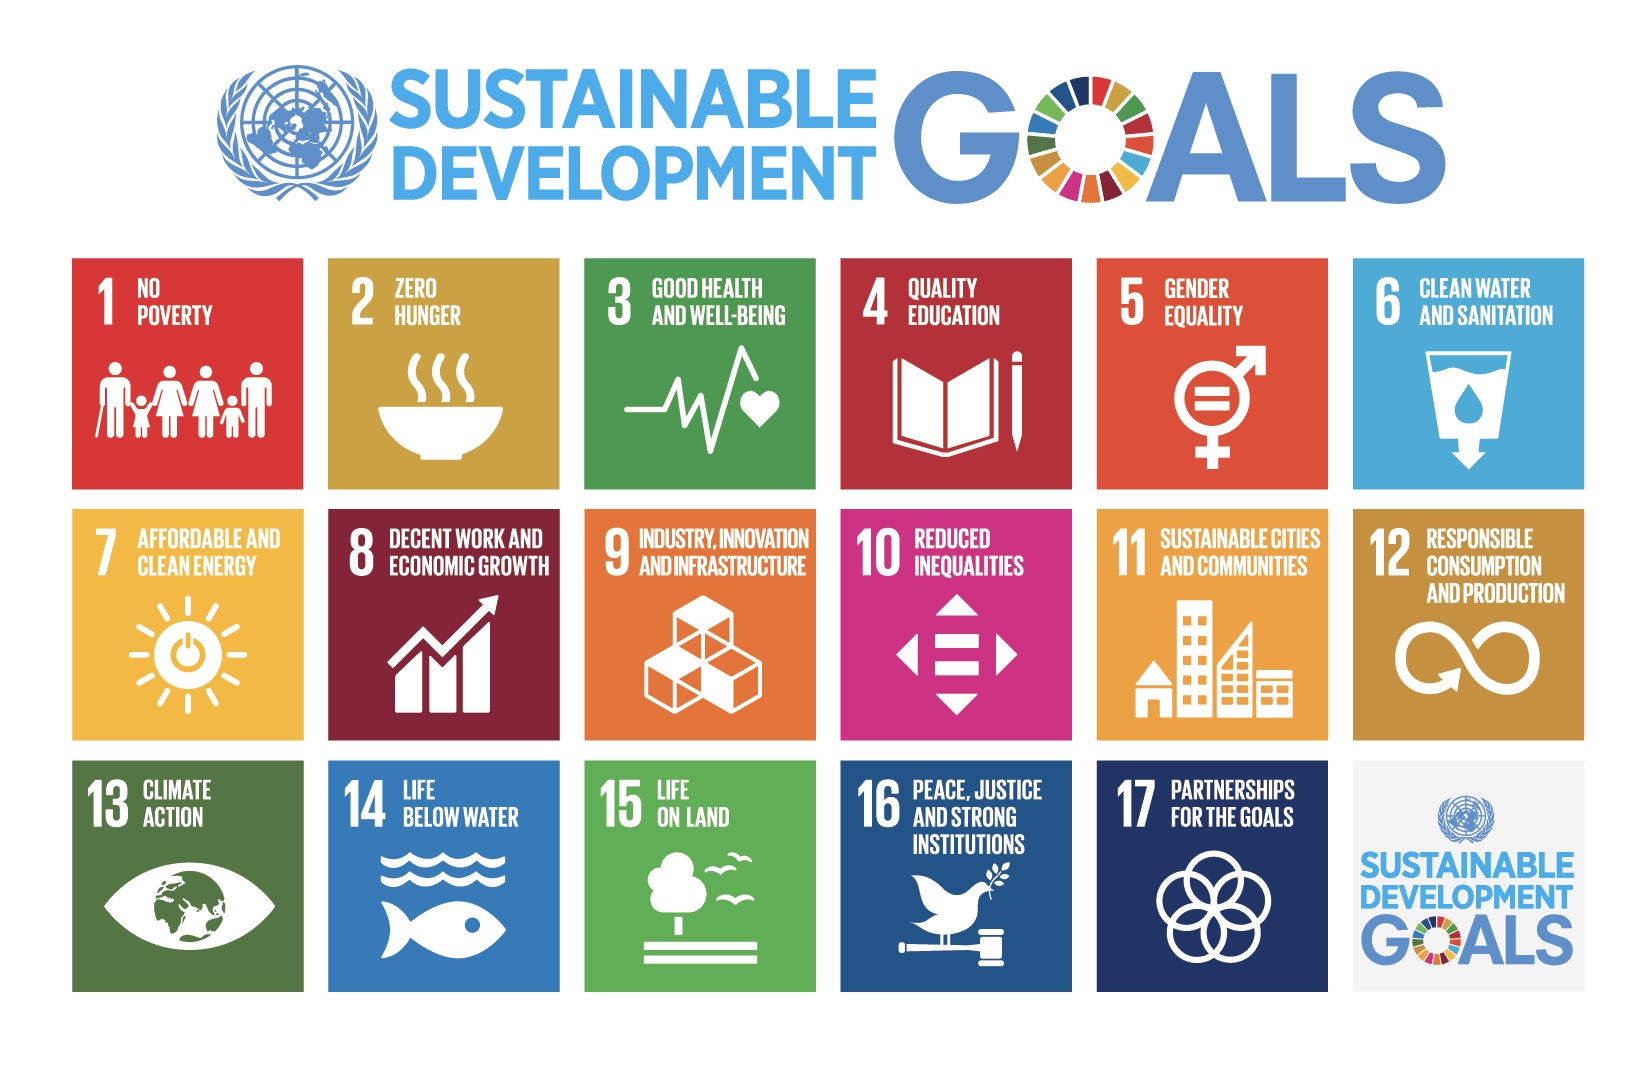 UN SDGs: Goal 1: No Poverty; Goal 2: Zero Hunger; Goal 3: Good Health and Well-Being; Goal 4: Quality Education; Goal 5: Gender Equality; Goal 6: Clean Water and Sanitation; Goal 7: Affordable and Clean Energy; Goal 8: Decent Work and Economic Growth; Goal 9: Industry, Innovation and Infrastructure; Goal 10: Reduced Inequalities; Goal 11: Sustainable Cities and Communities; Goal 12: Responsible Production and Consumption; Goal 13: Climate Action; Goal 14: Life Below Water; Goal 15: Life On Land; Goal 16: Peace, Justice and Strong Institutions; Goal 17: Partnerships for the Goals.